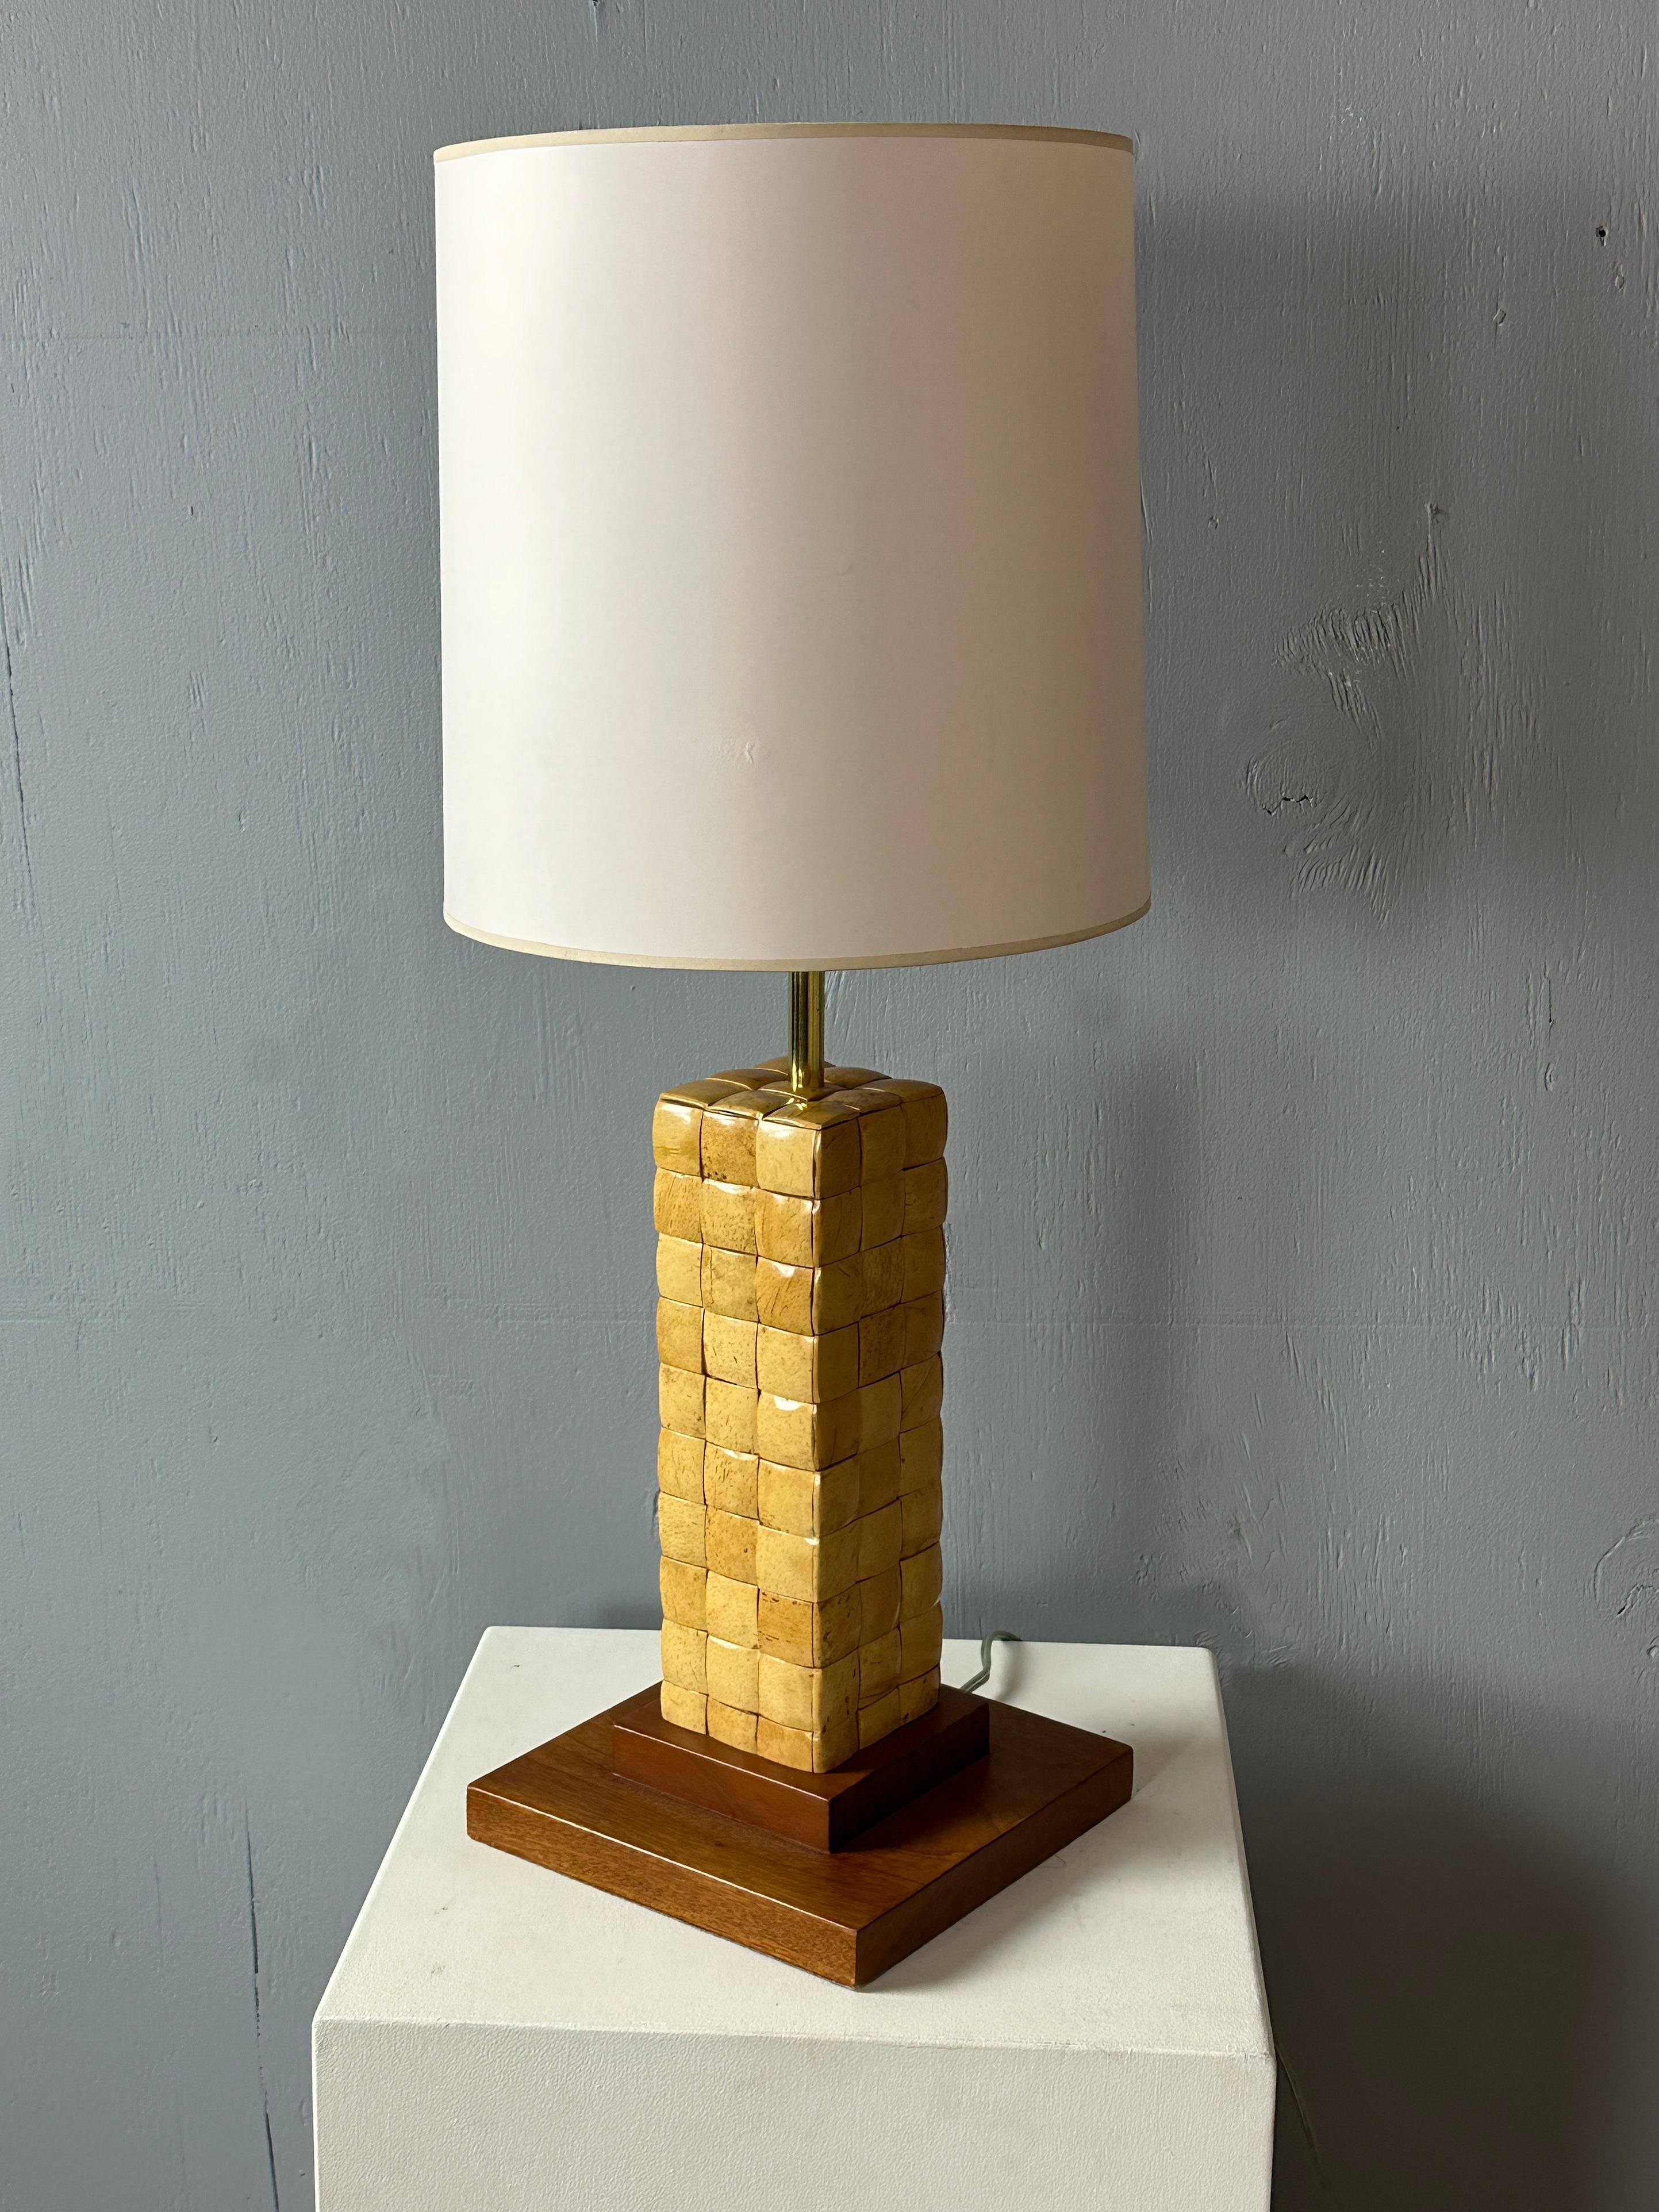 Visionary Paul Laszlo designed this mid-century table lamp for Brown Saltman during the 1950s in the United States.  It has a wood body adorned with Laszlo's chest pattern, reminiscent of his famed 